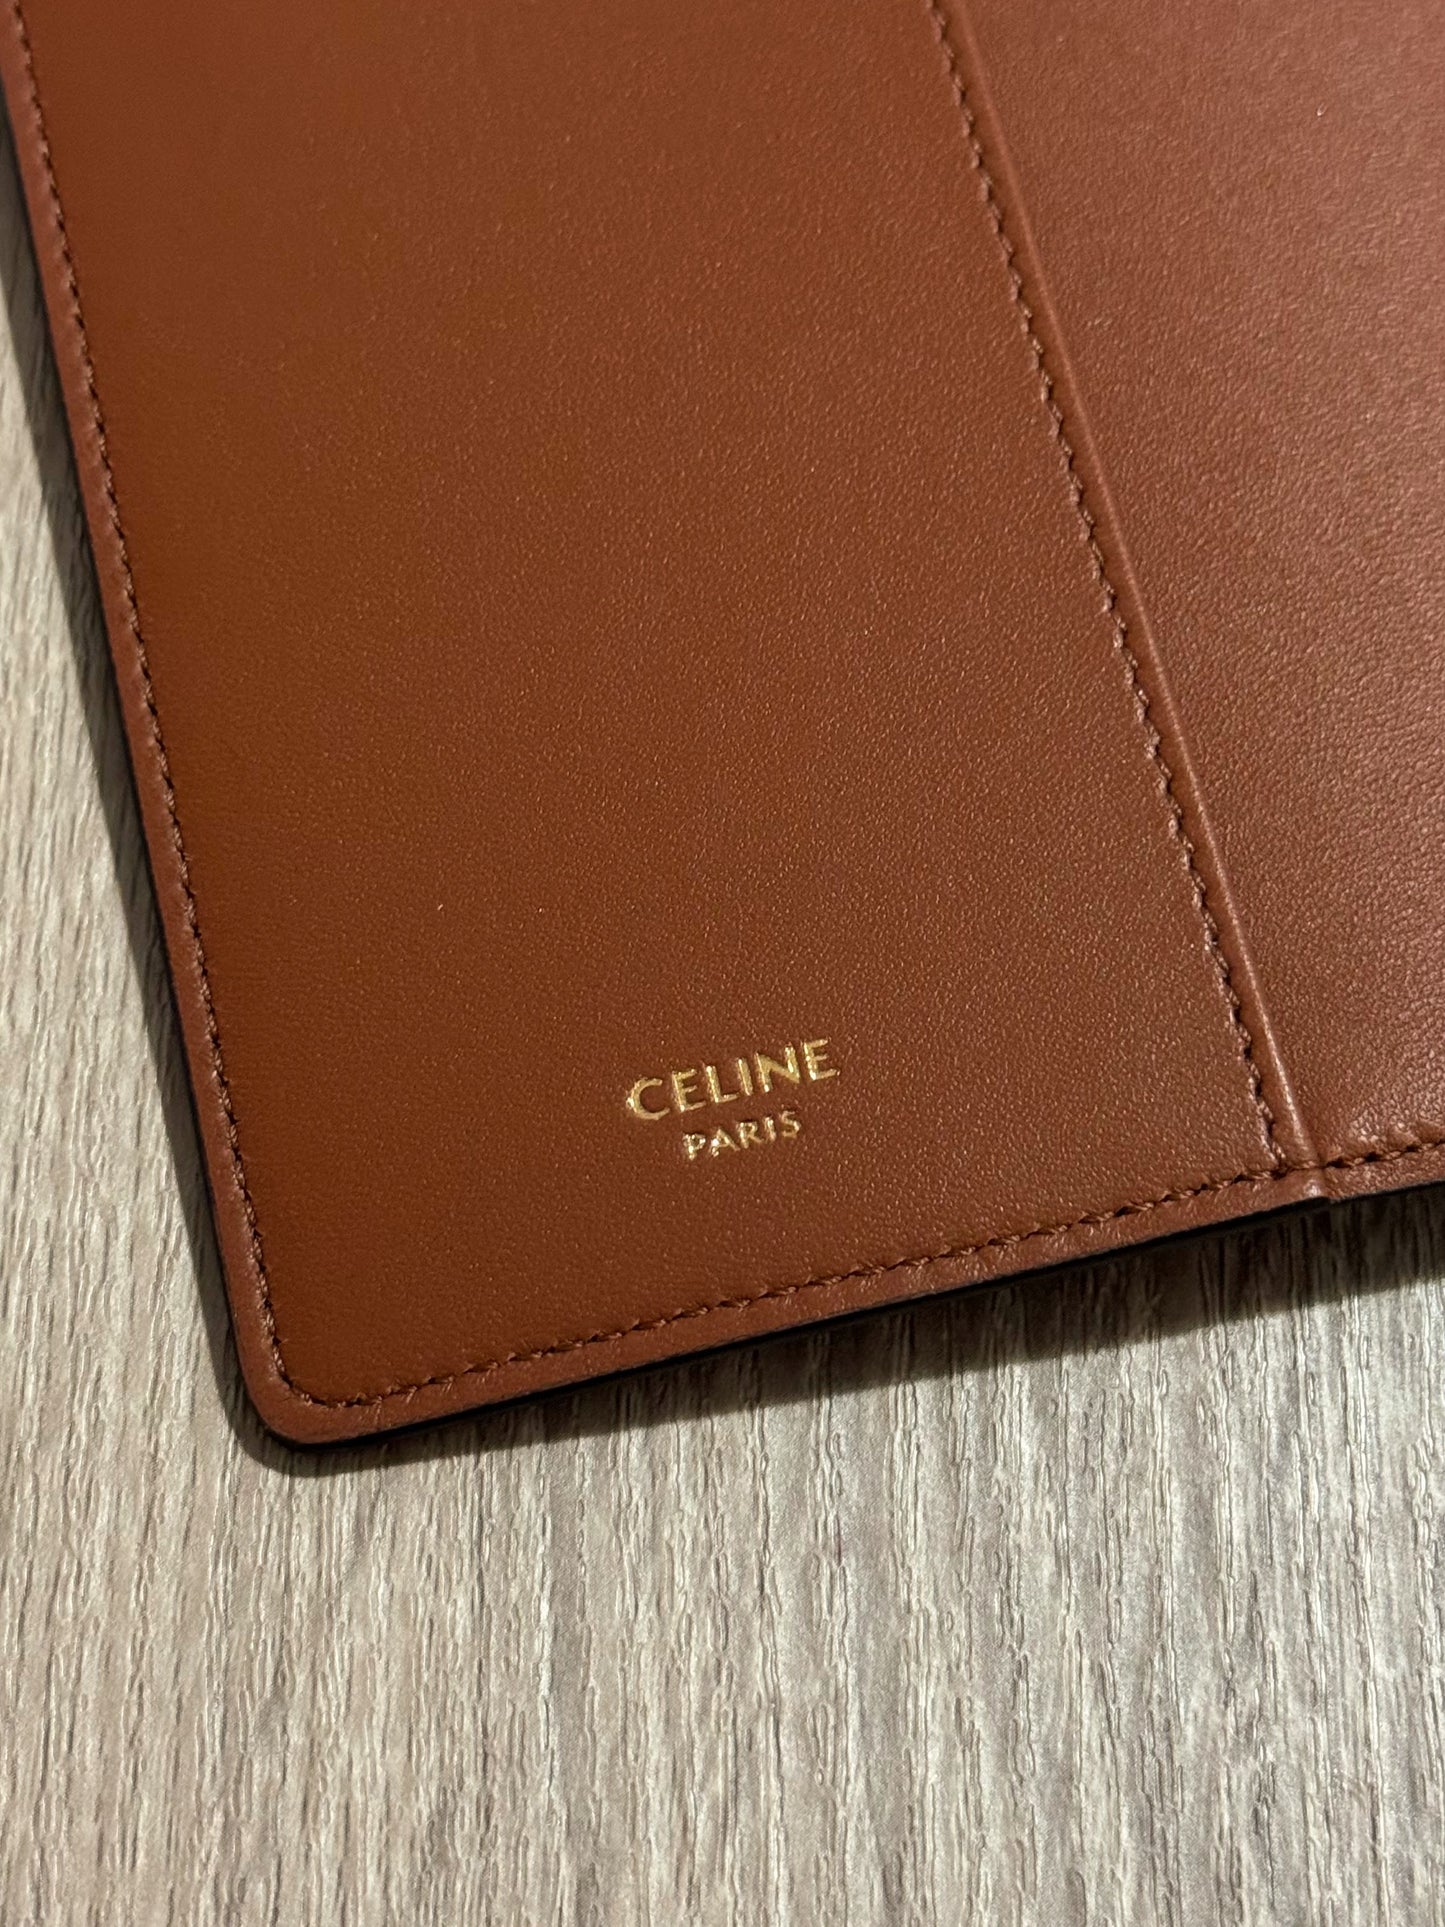 Celine Triomphe Notebook and Cover